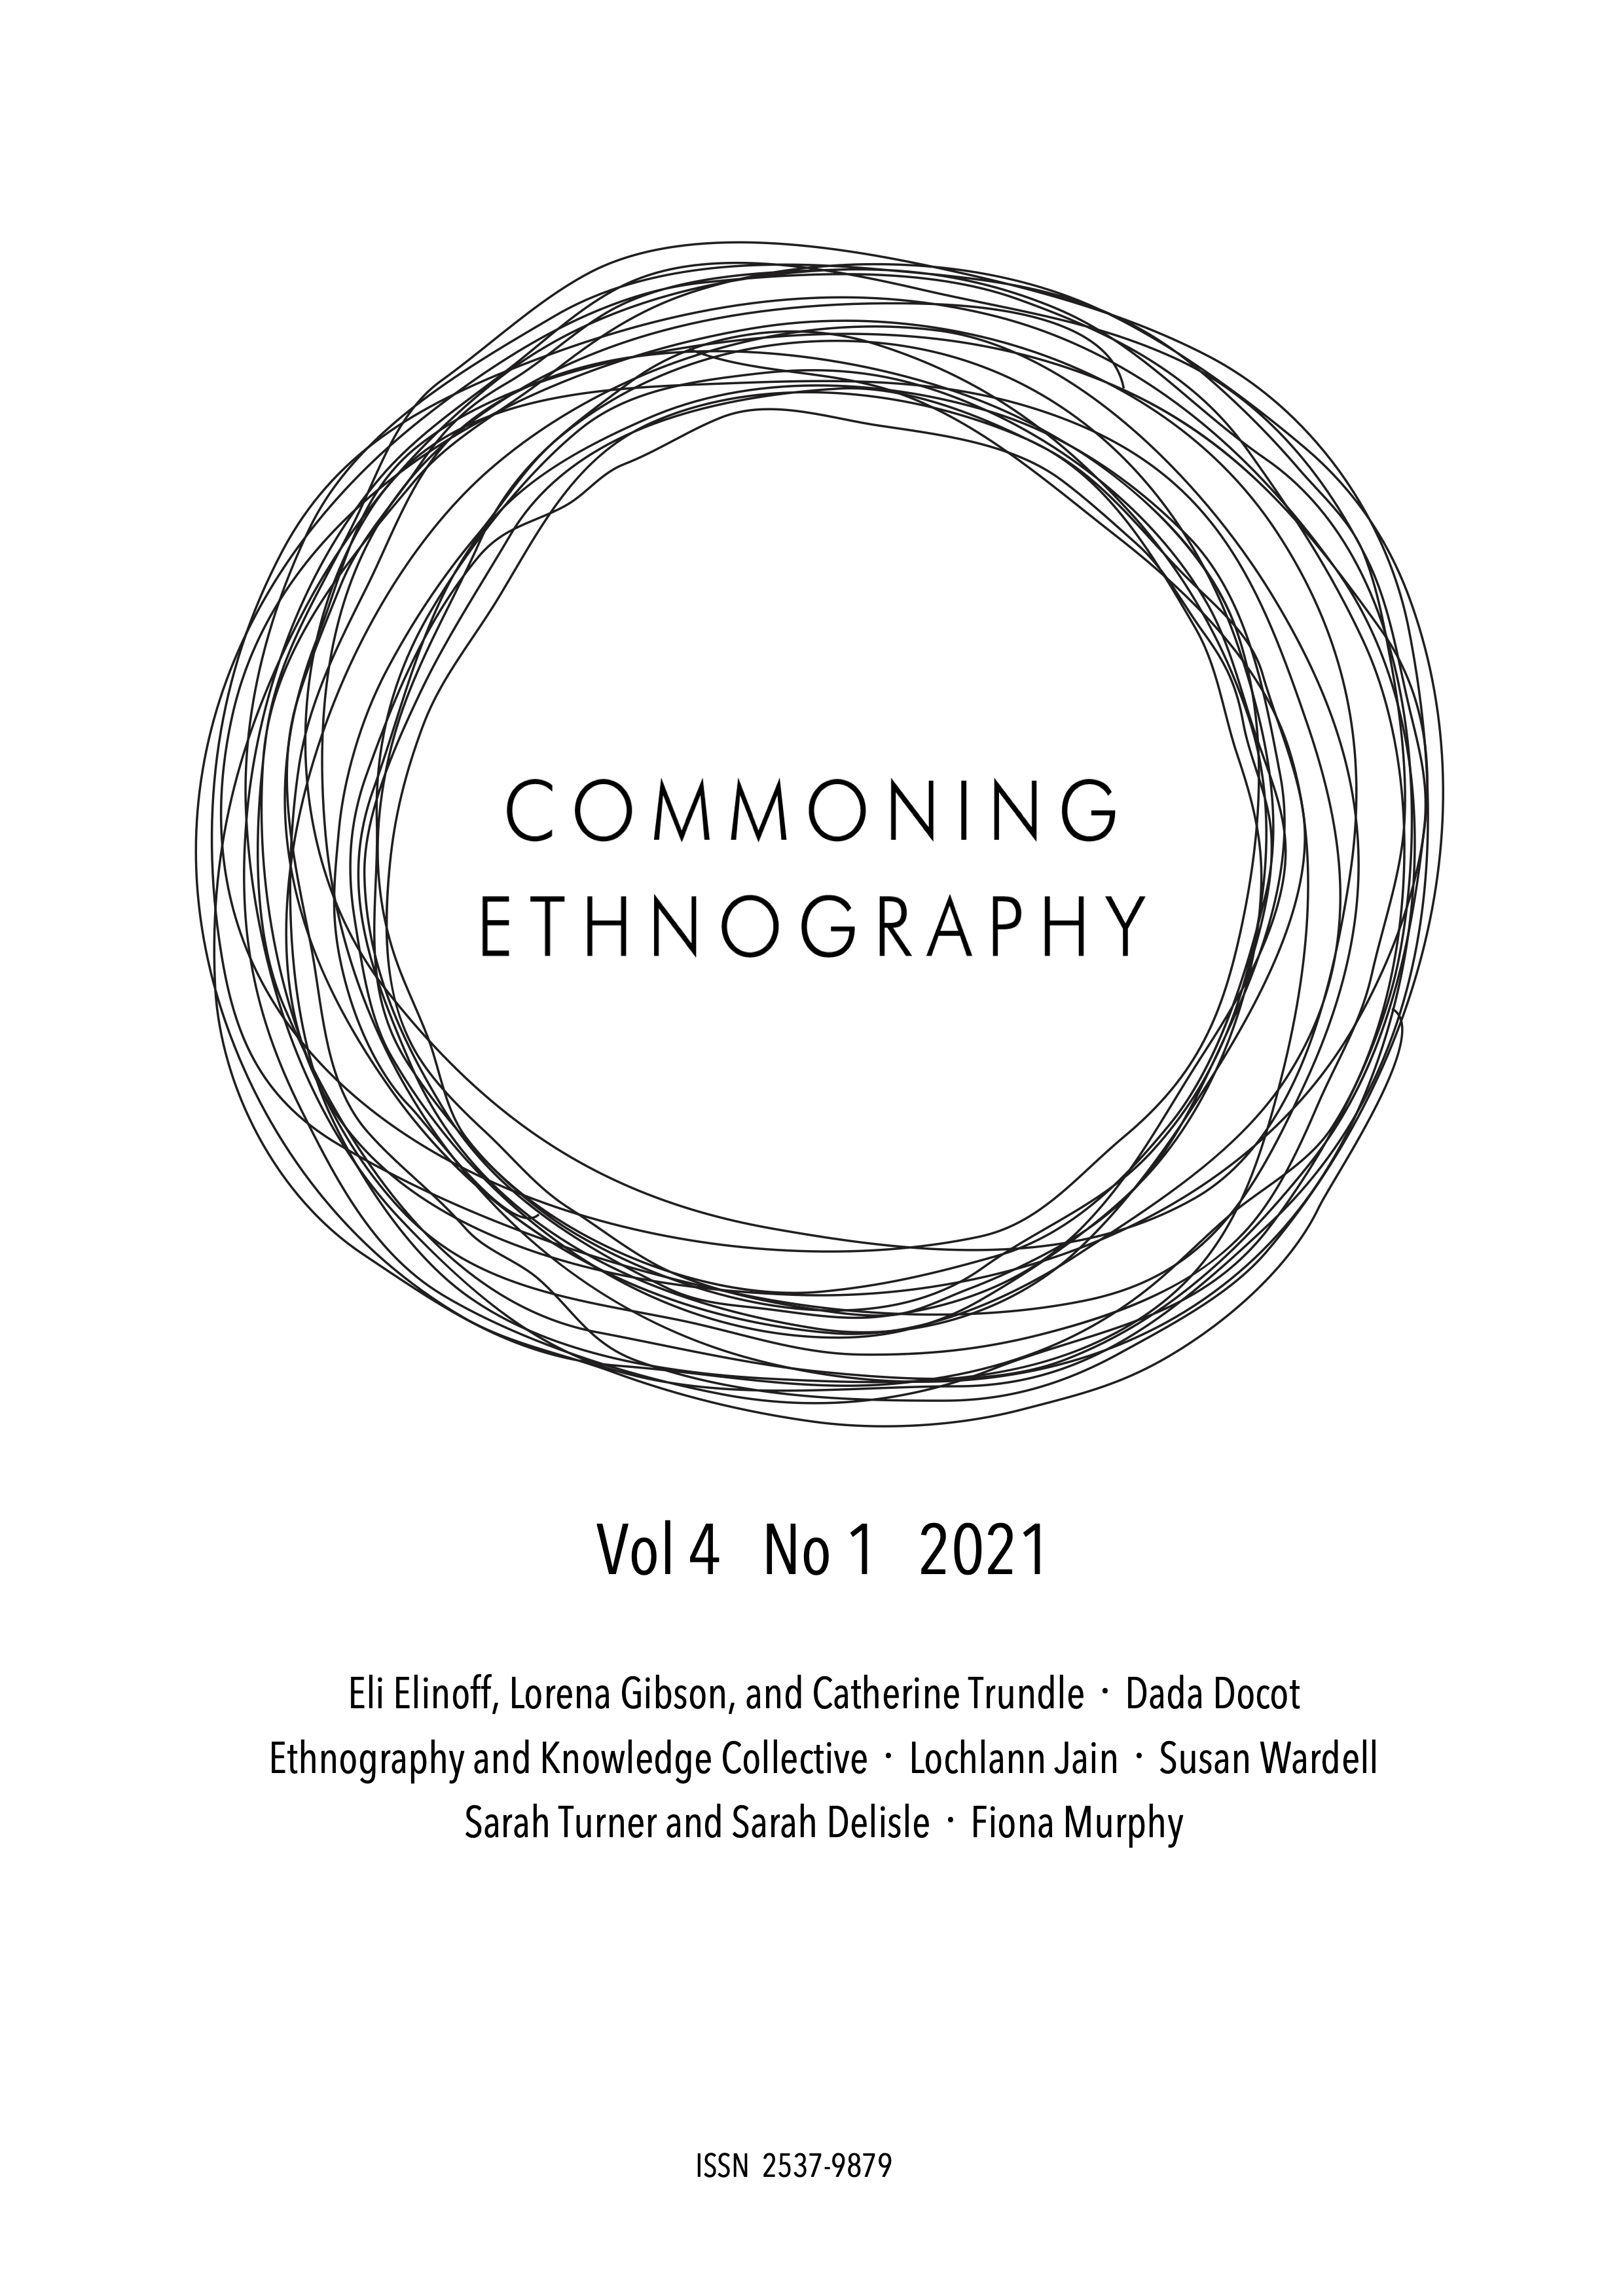 					View Vol. 4 No. 1 (2021): Commoning Ethnography
				